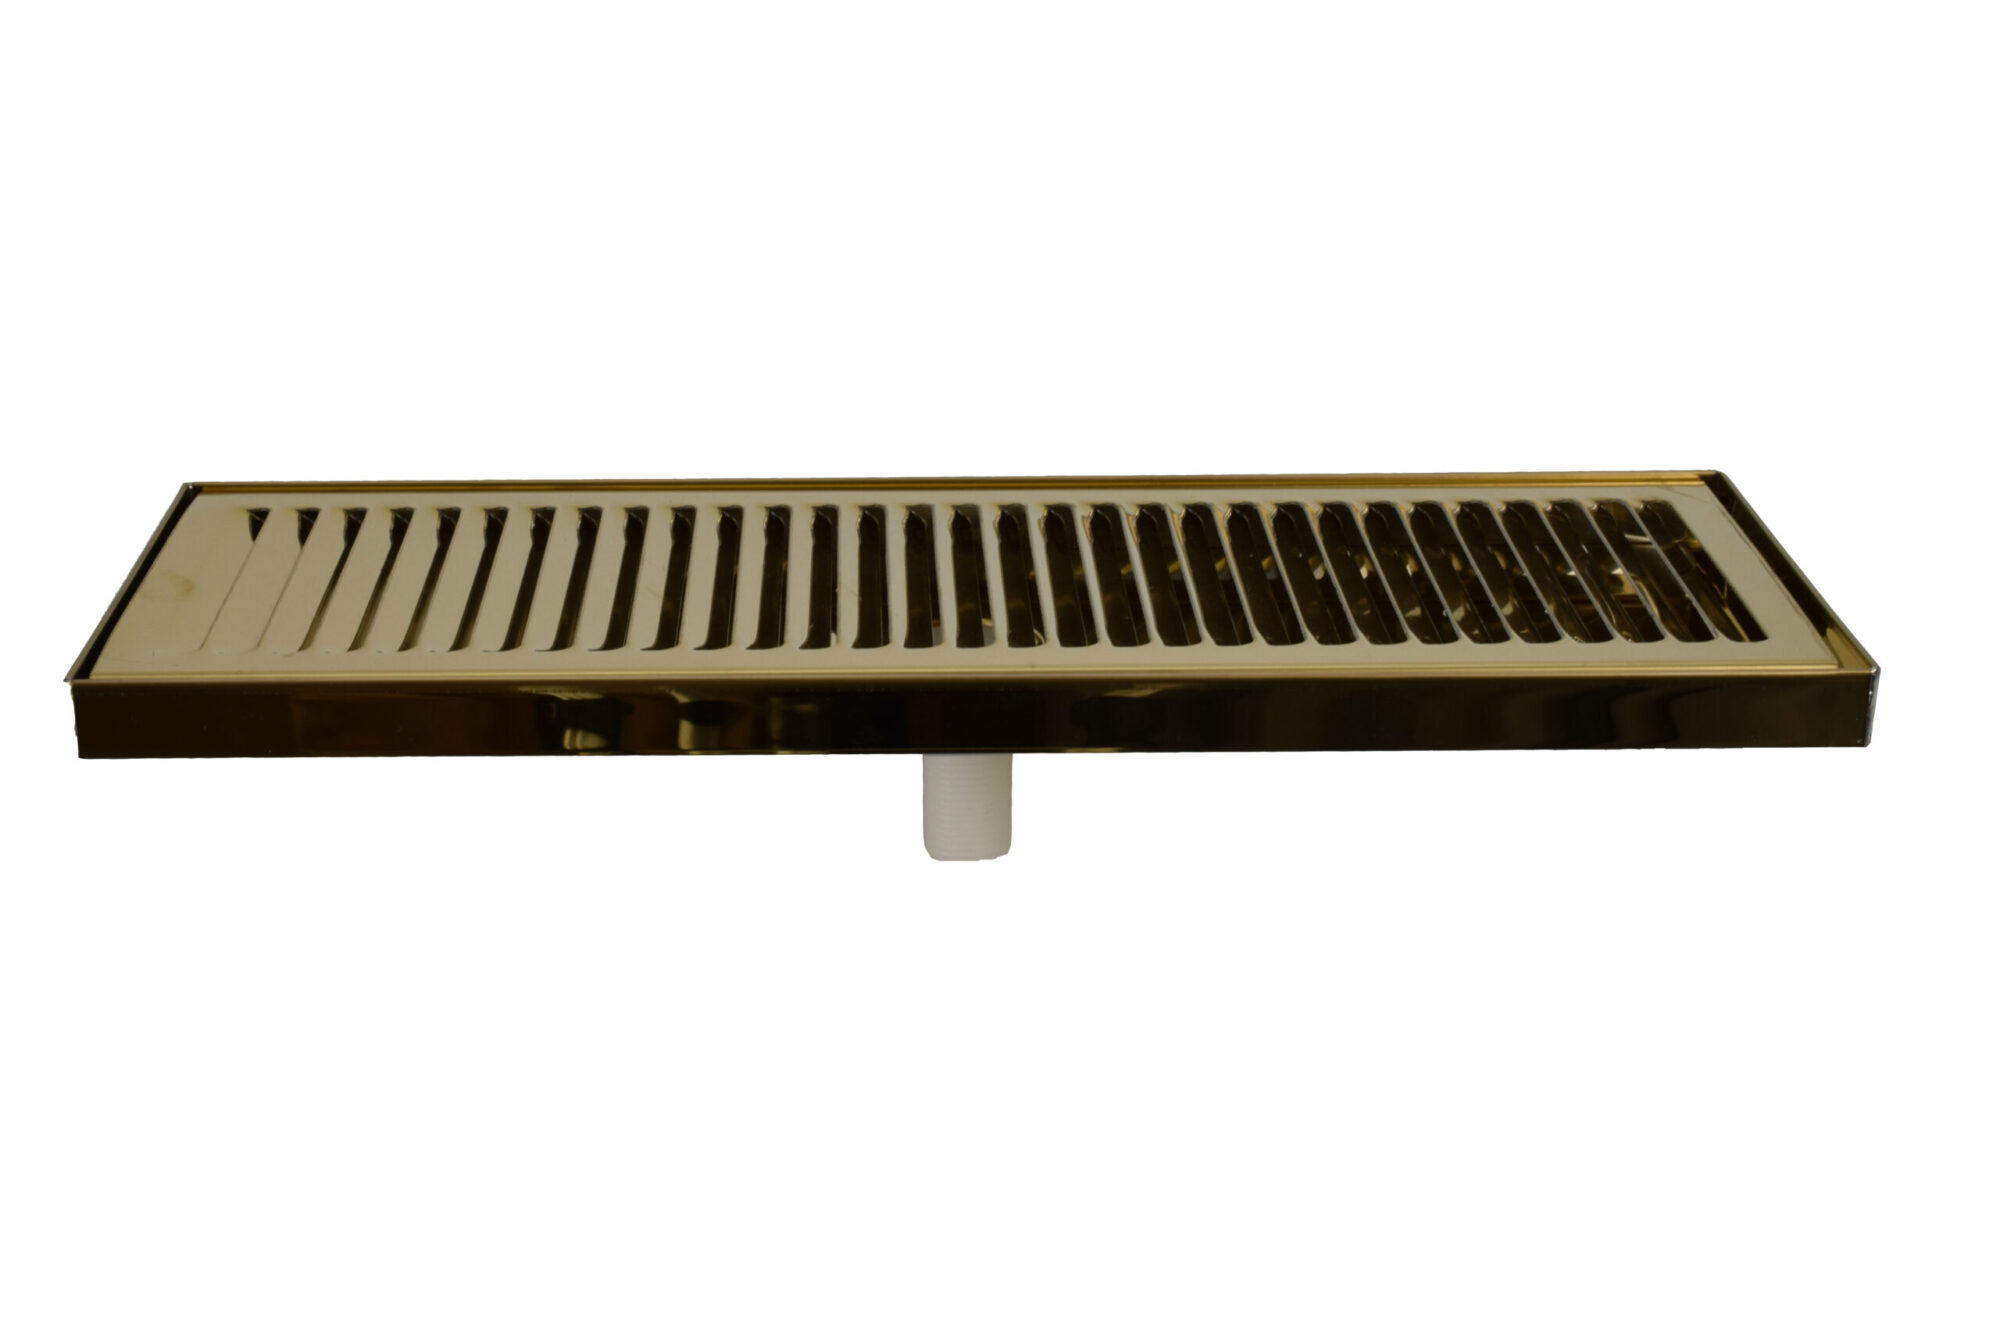 616LBM-36 PVD Brass Counter Top Tray with Drain and PVD Brass Grid - 36"L x 5 3/8"W x 3/4"D